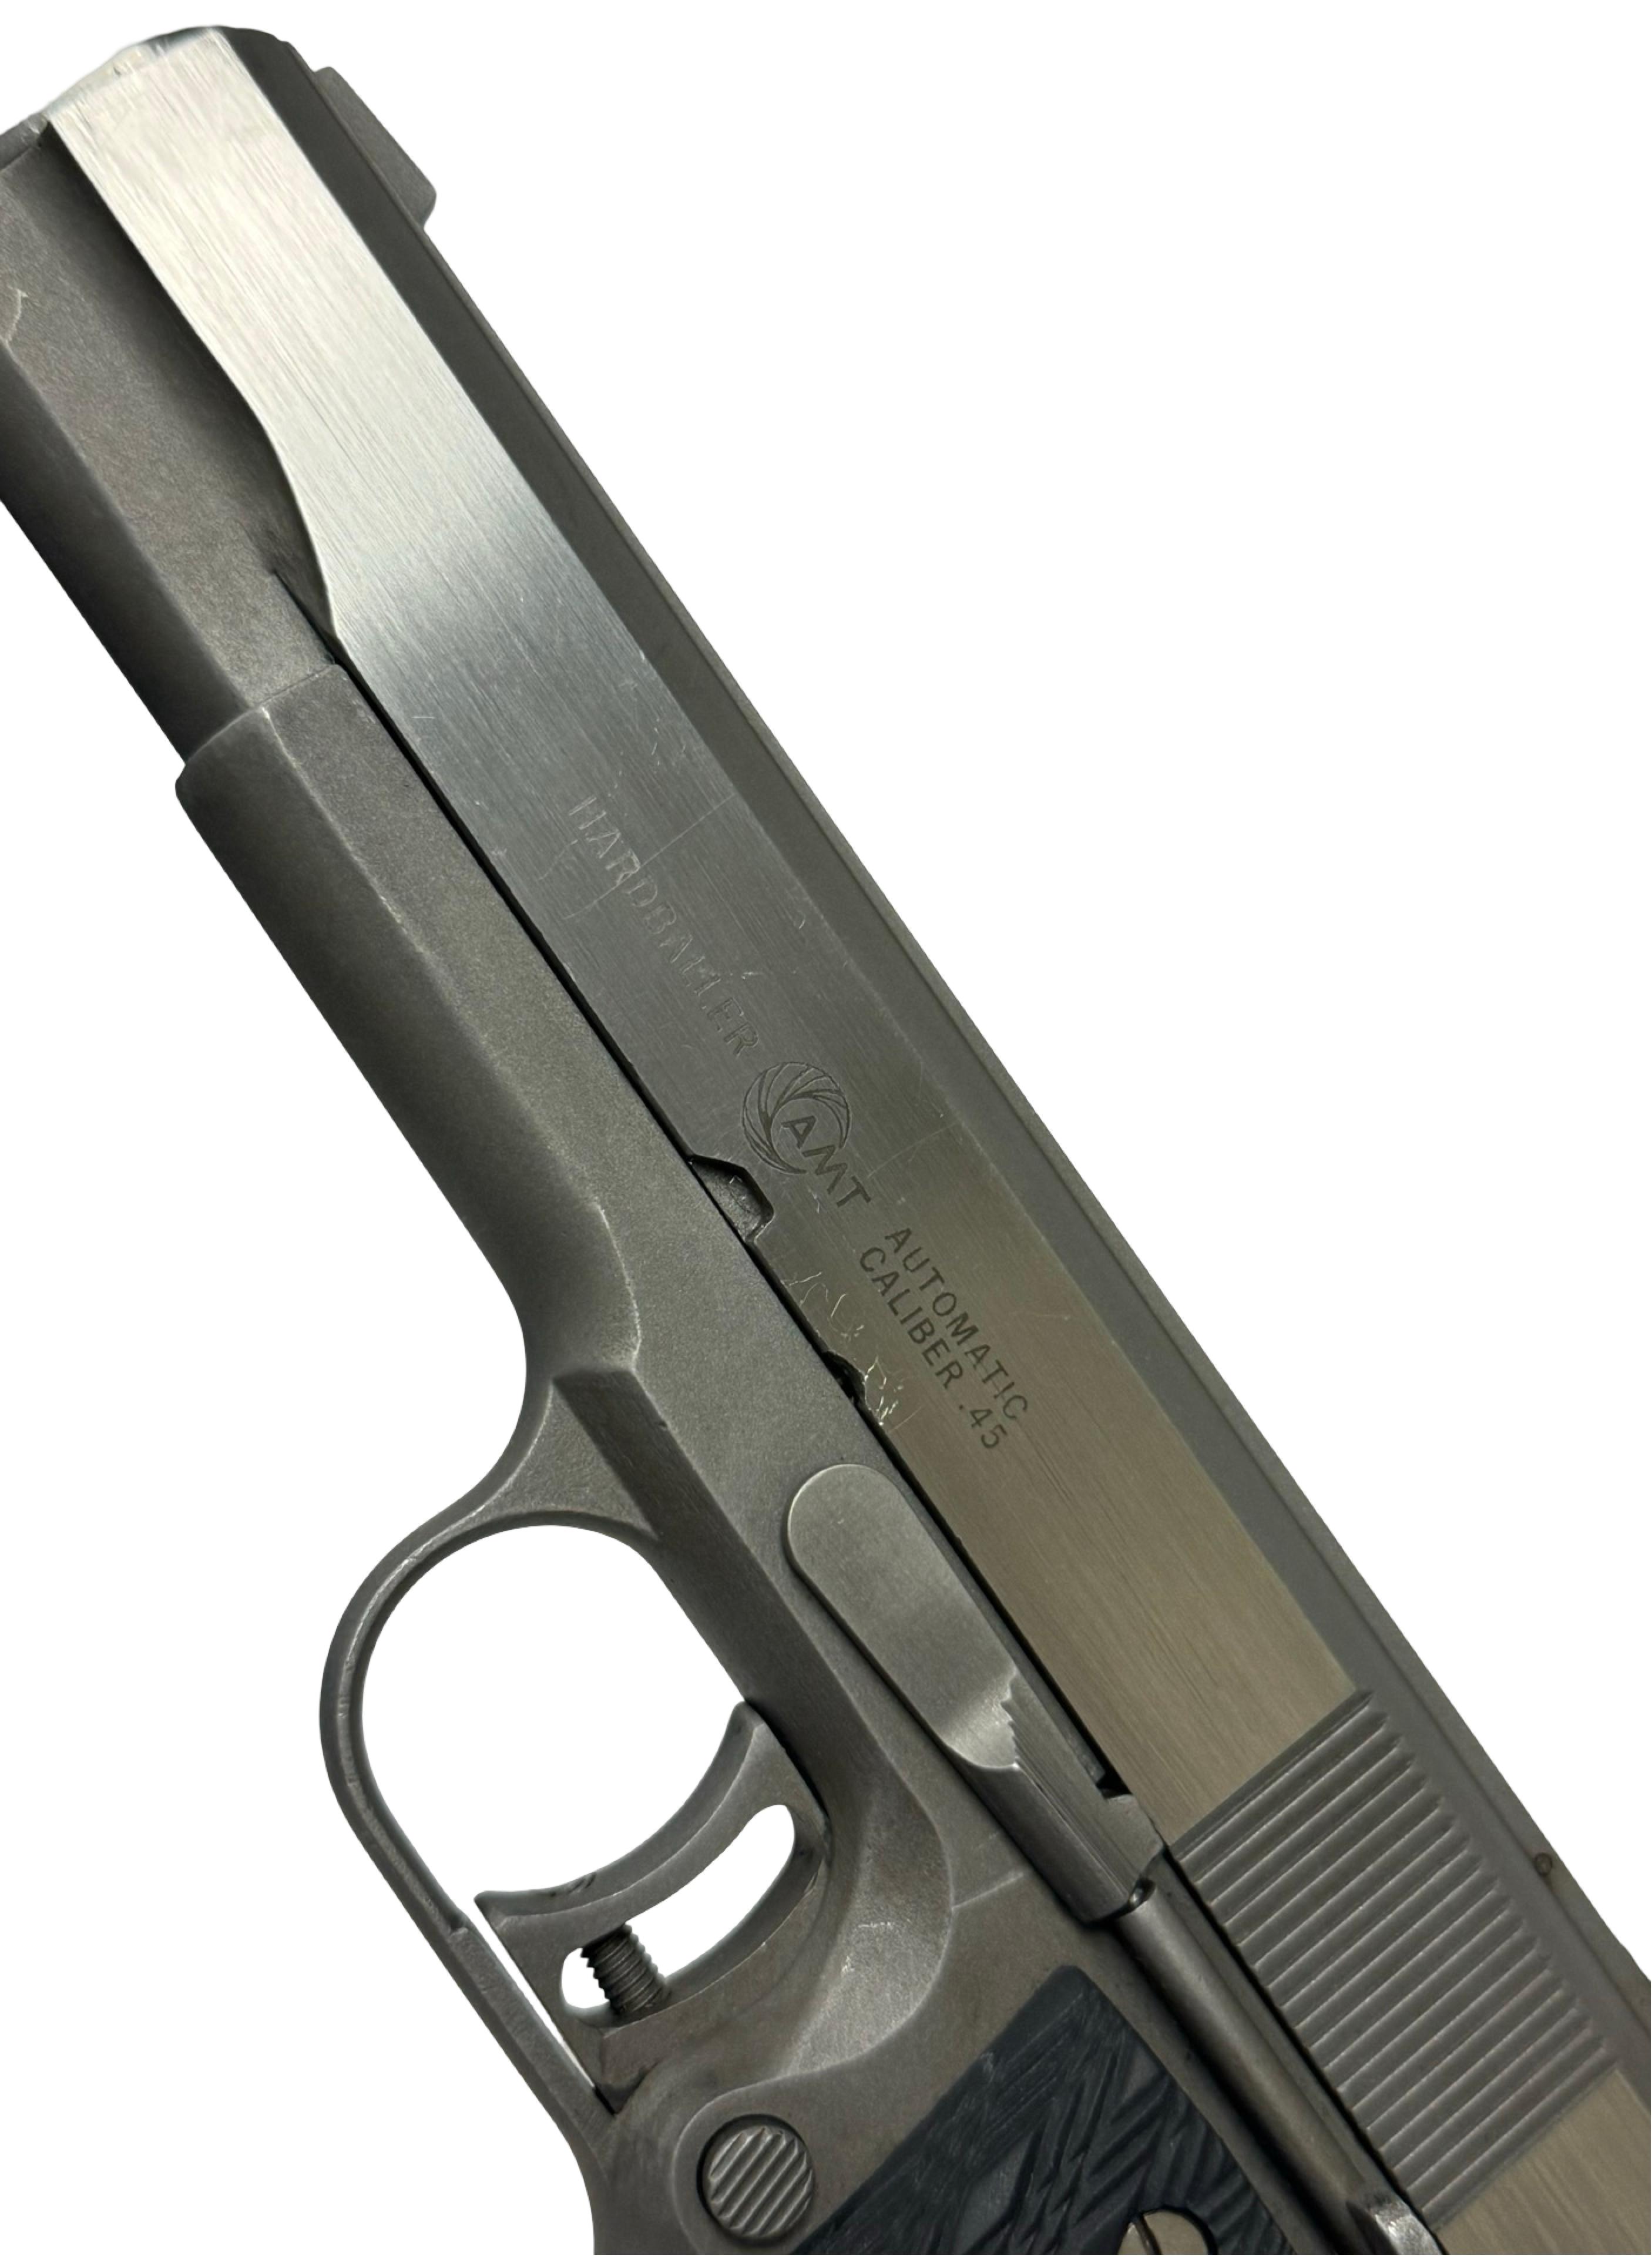 Excellent AMT Hardballer Stainless Steel .45 ACP Semi-Automatic 1911 Pistol with Soft Case